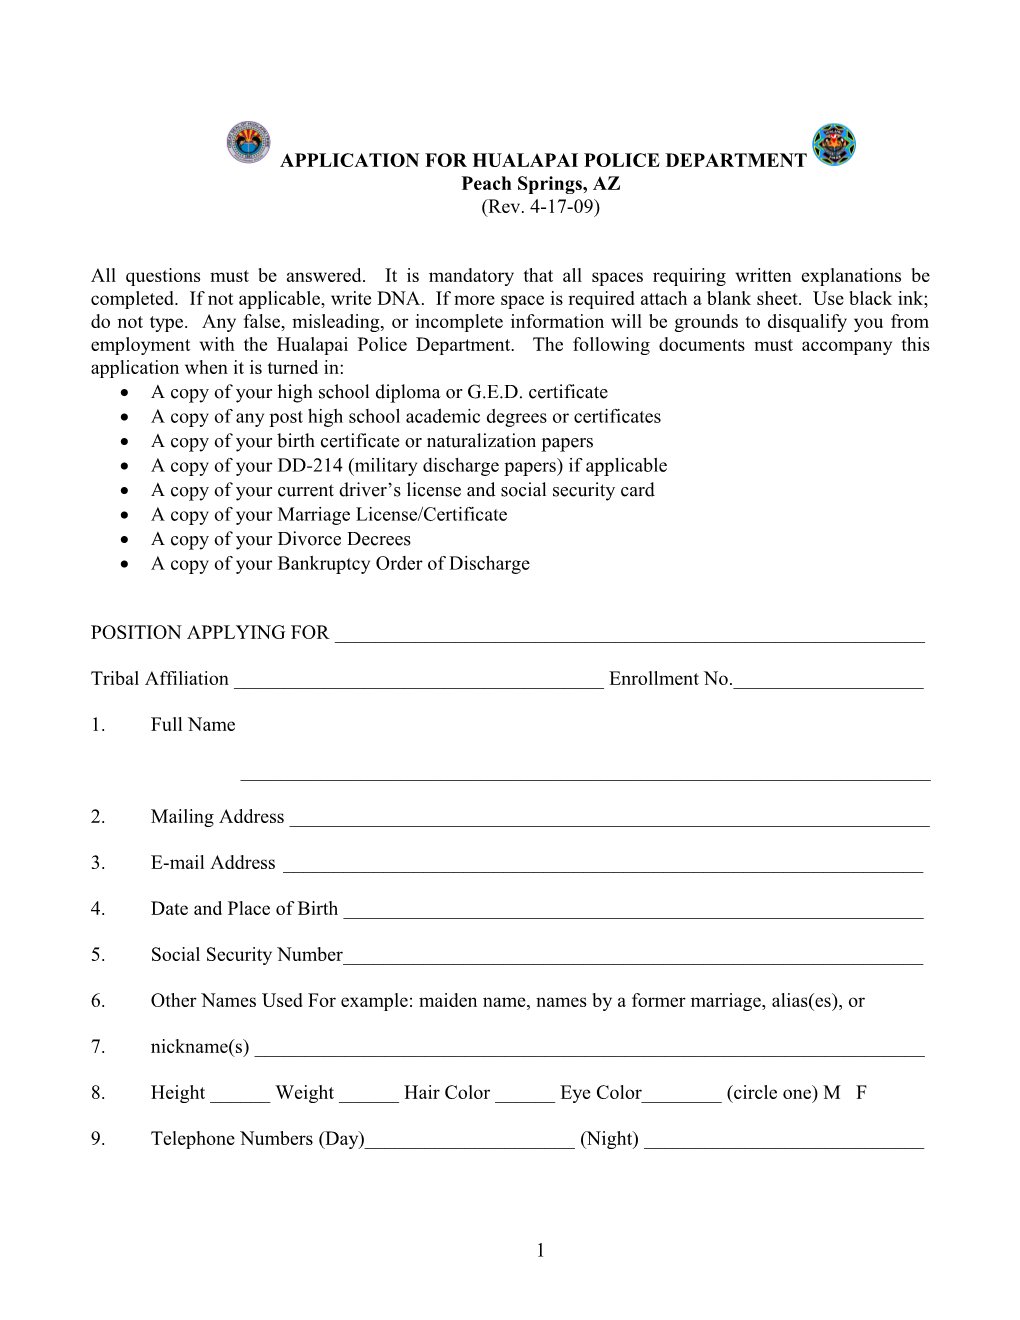 Application for Hualapai Nation Police Department